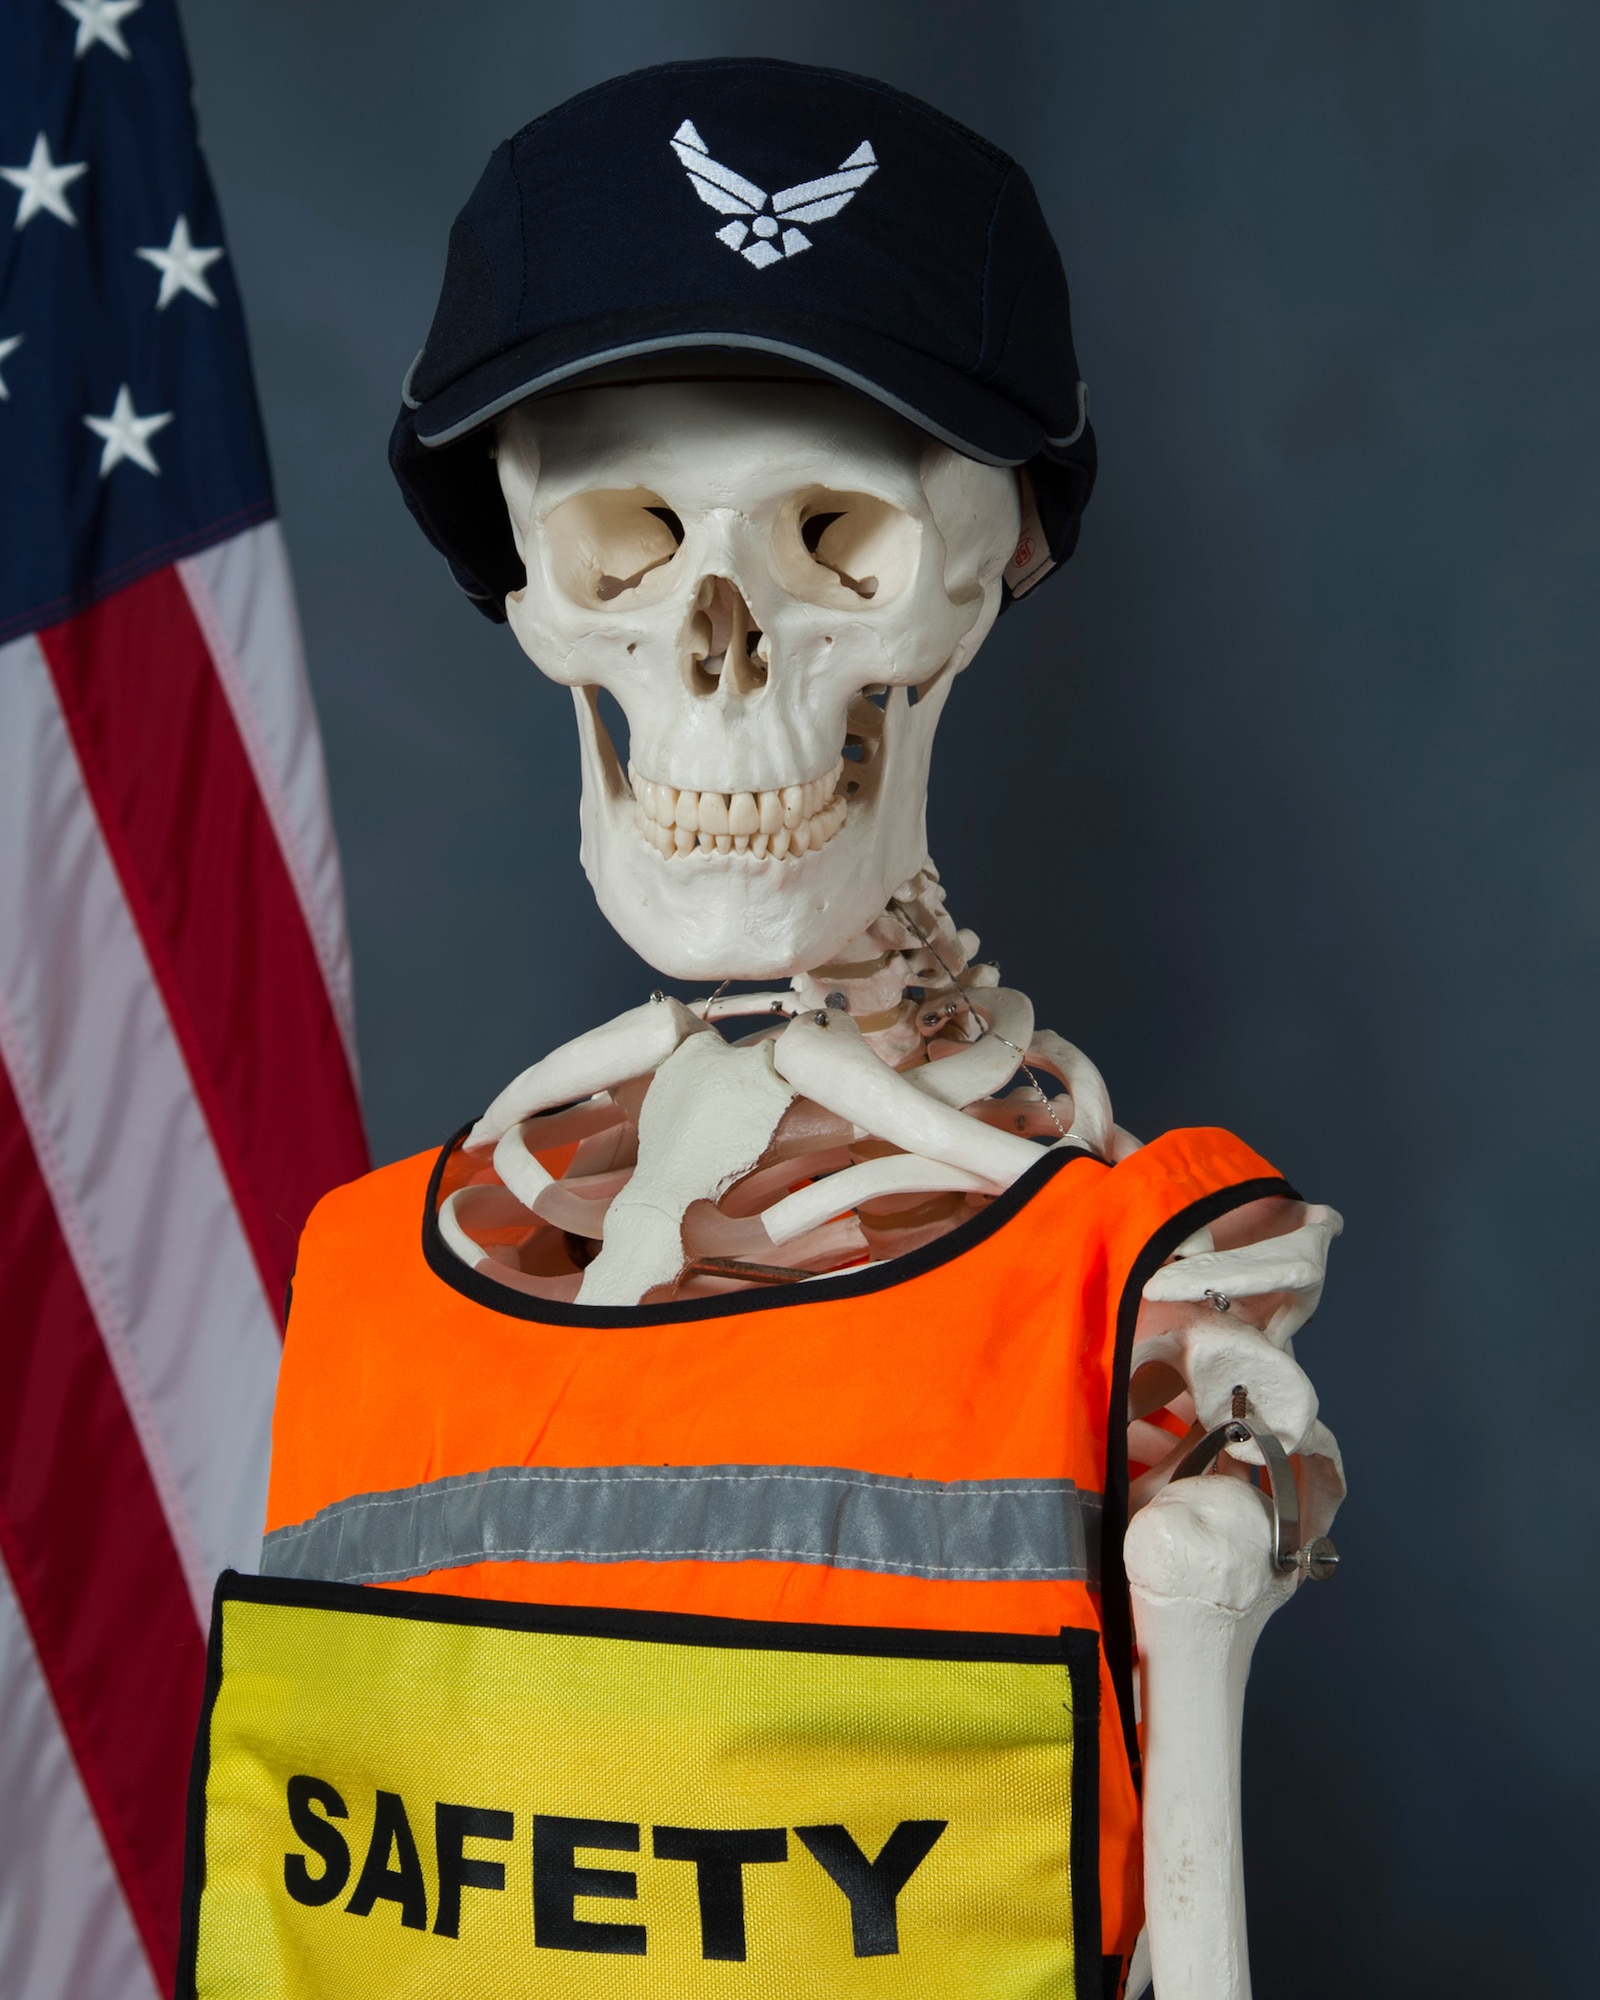 MacBones, the safety skeleton assigned to the 6th Air Mobility Wing safety office, pauses for a photo at MacDill Air Force Base, Fla., Feb. 28, 2018.